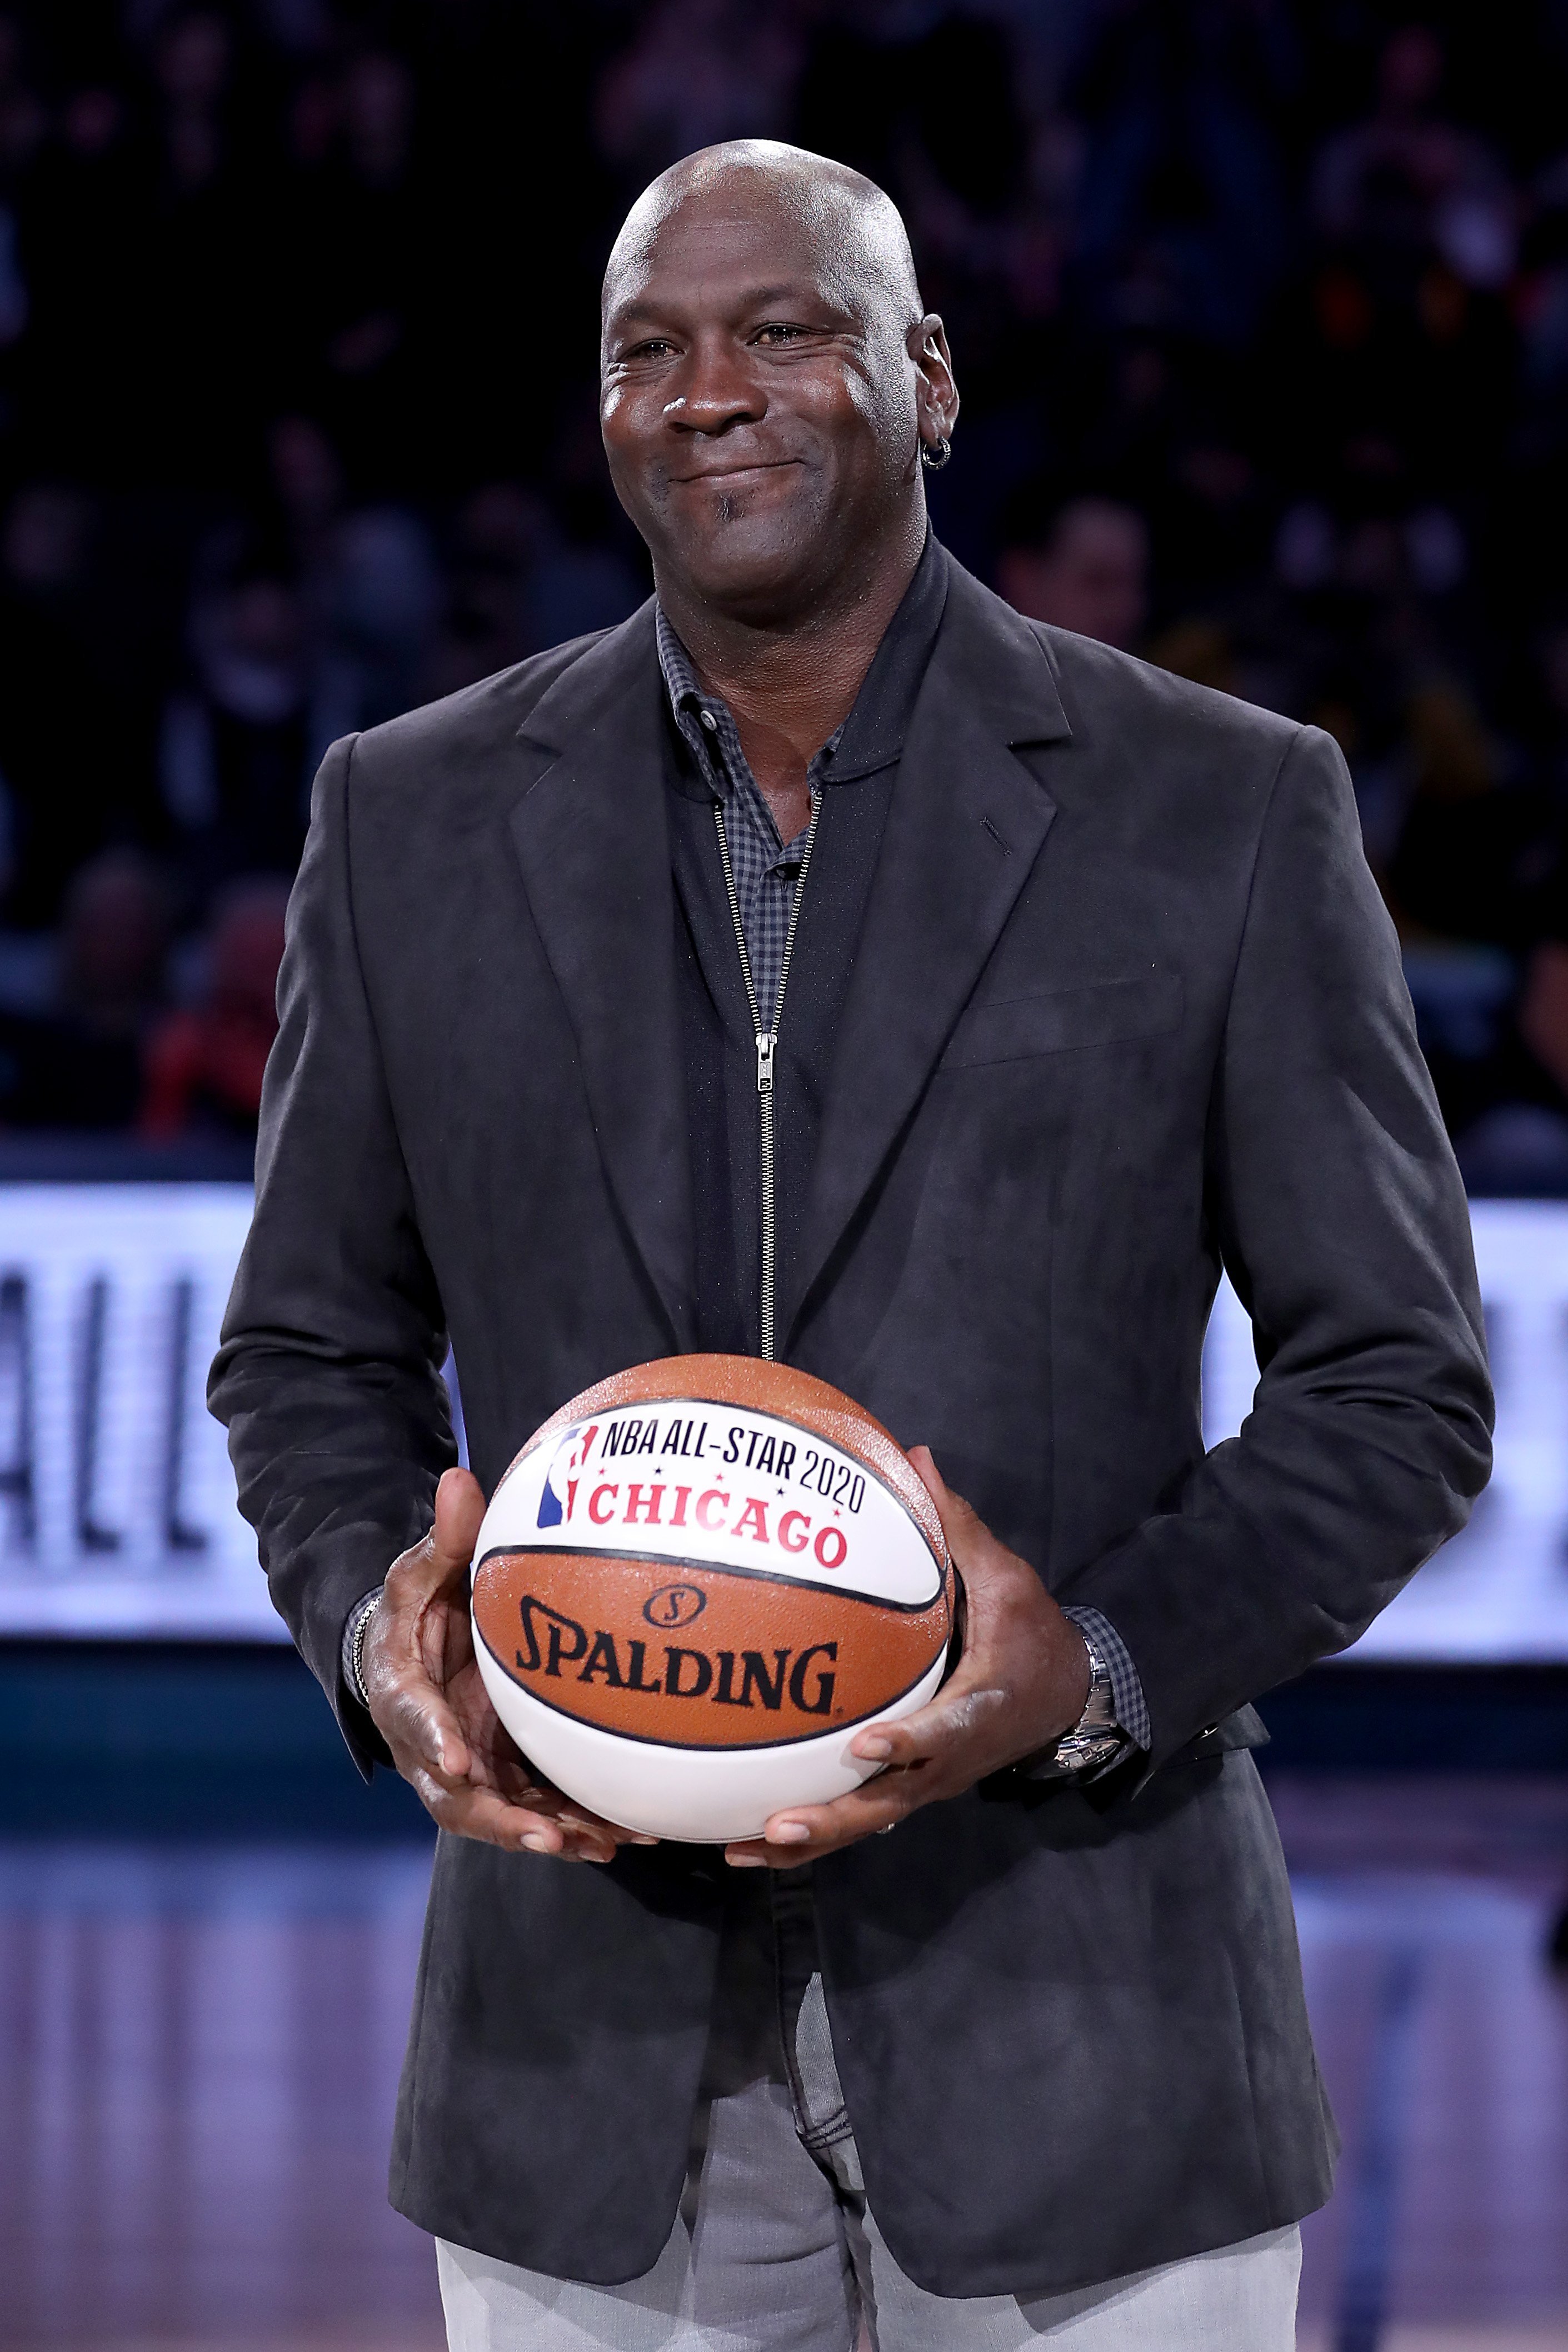 Magic Johnson at the NBA All-Star Weekend 2020 in Chicago | Source: Getty Images/GlobalImagesUkraine